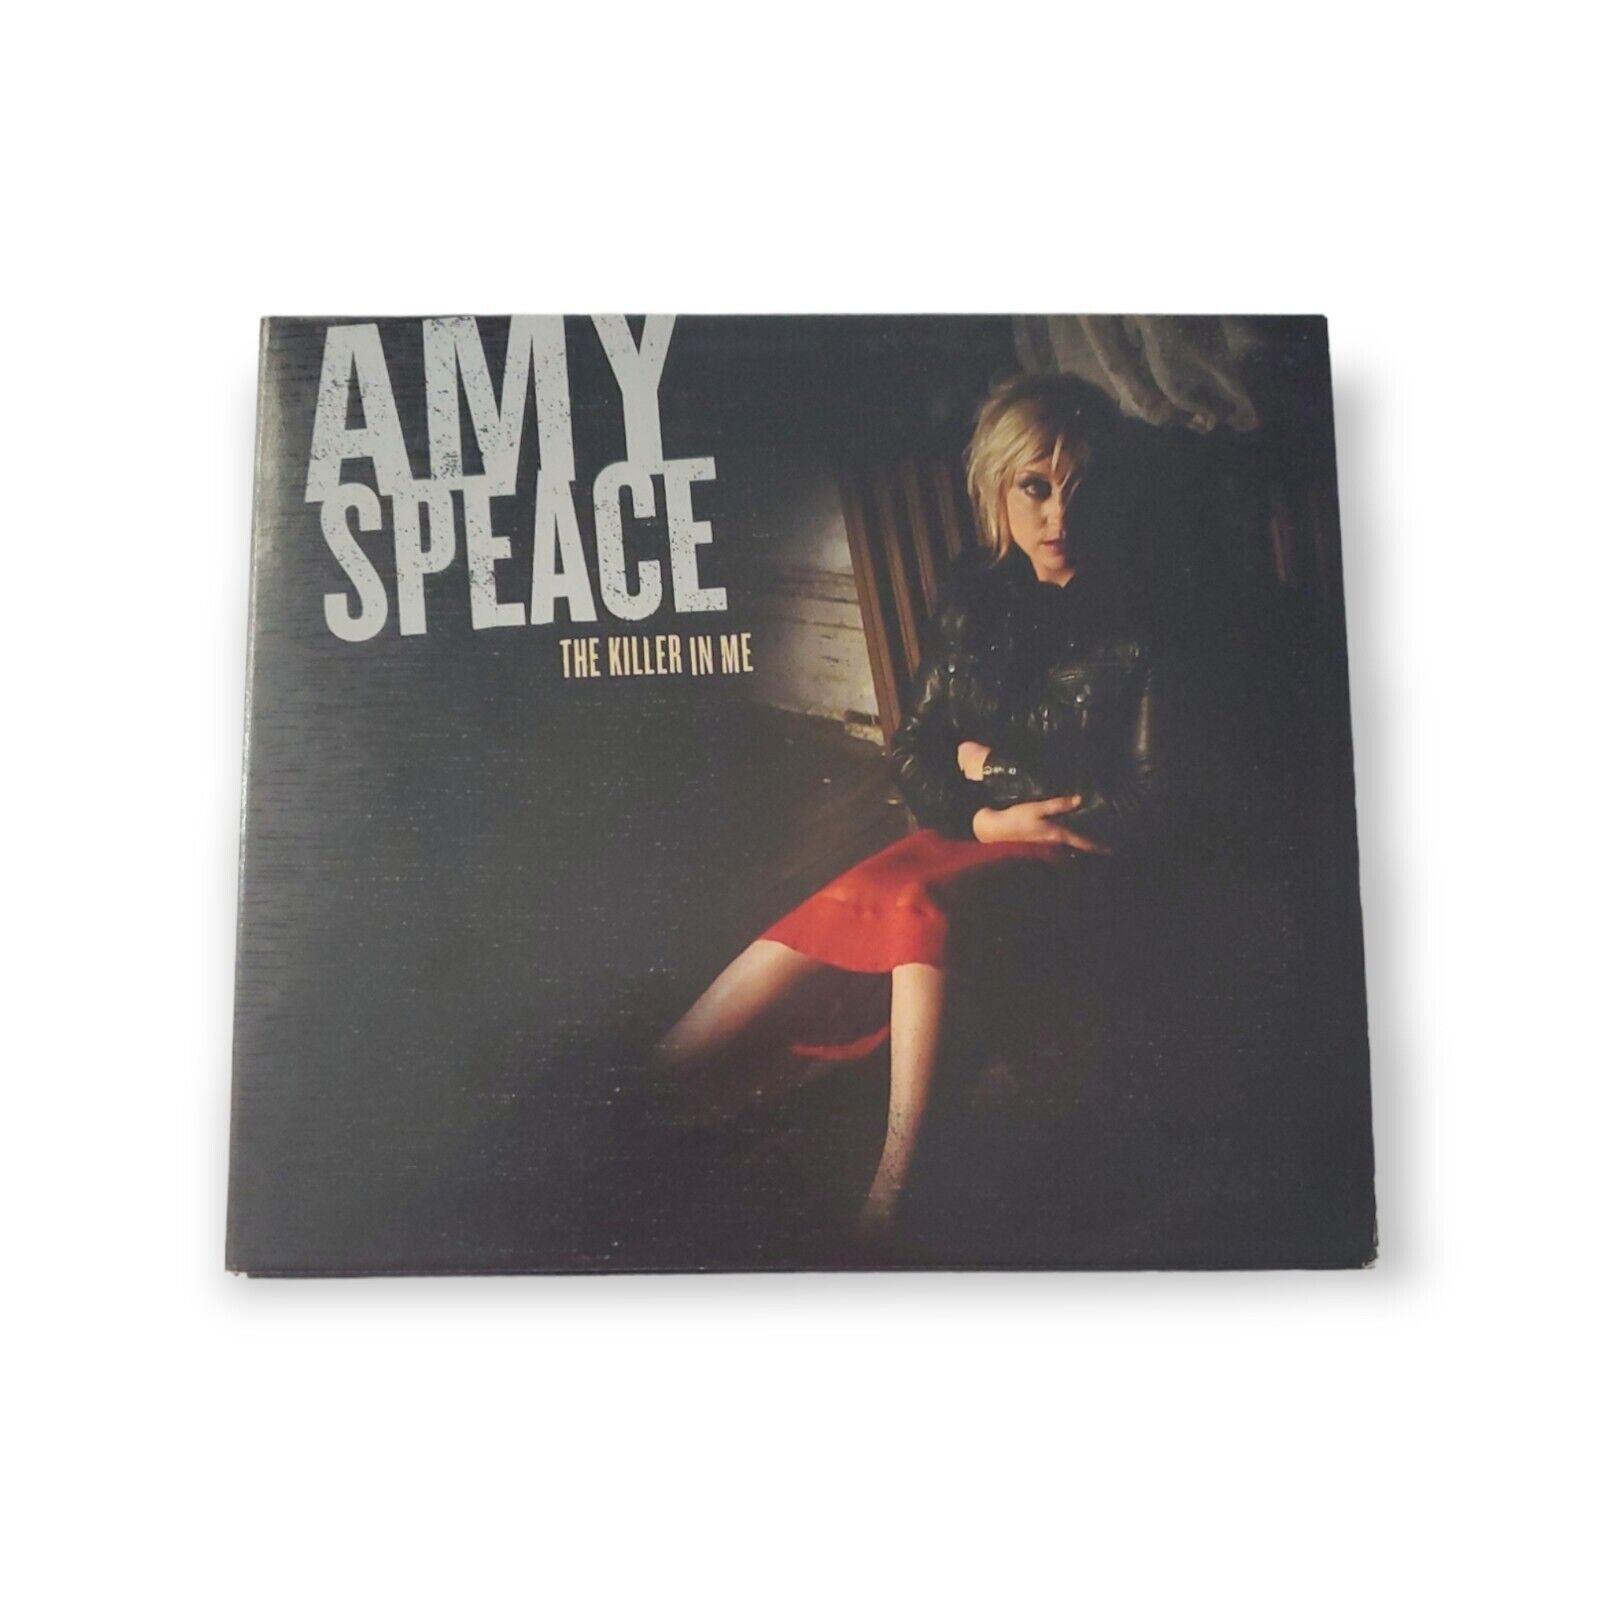 Amy Speace - The Killer in Me [2008 Promotional CD]